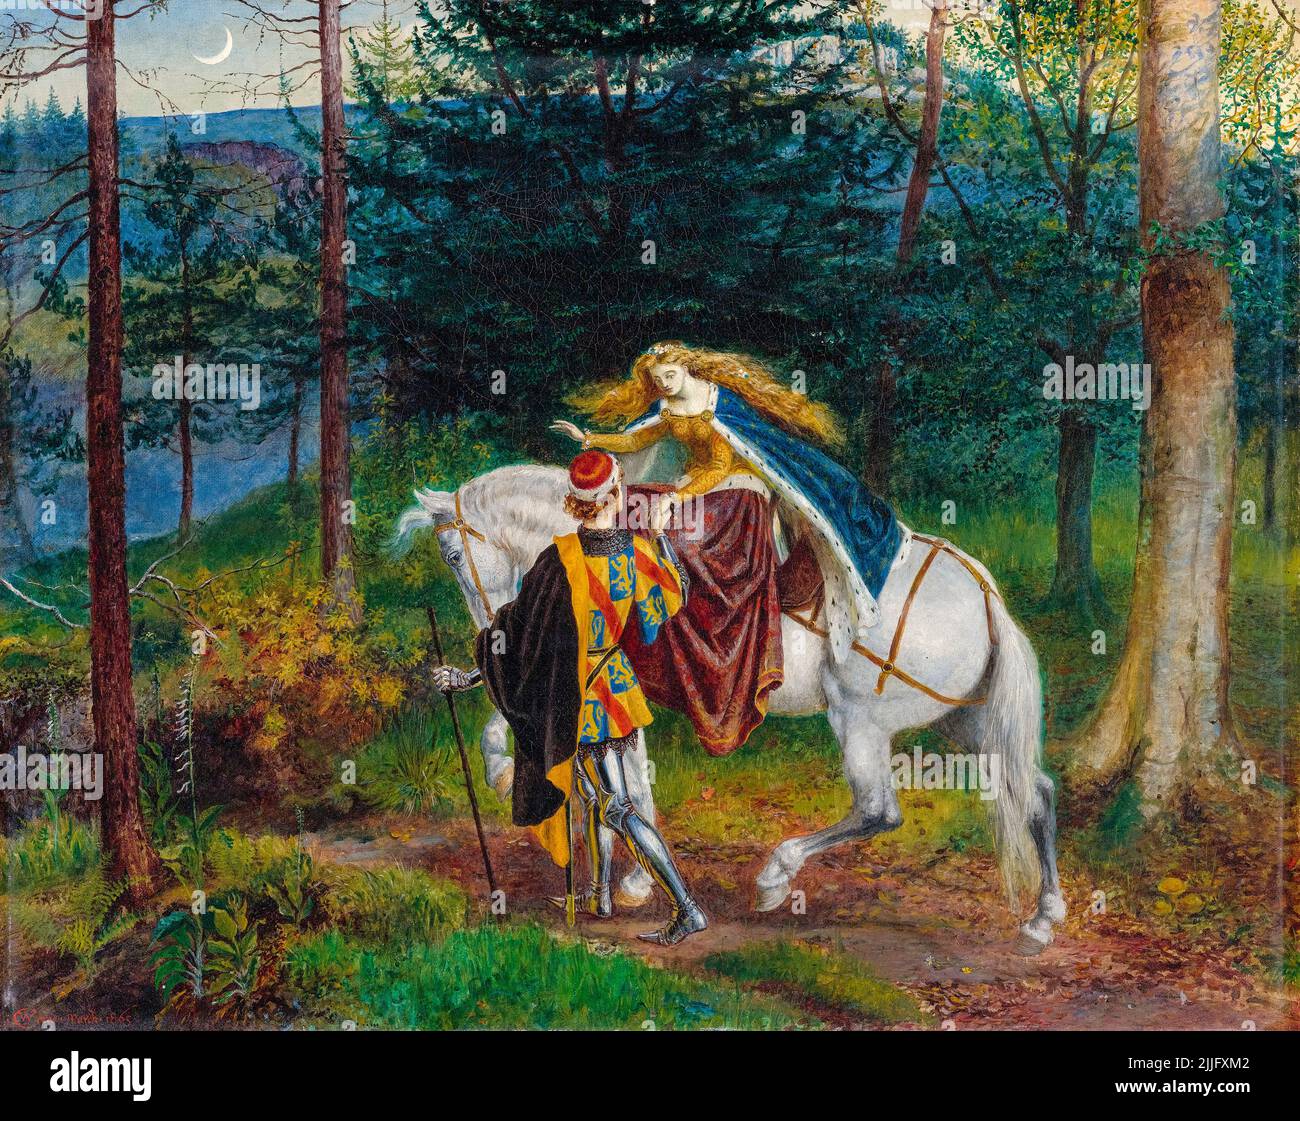 Oil painting portrait young woman ride white horse in forest landscape canvas 